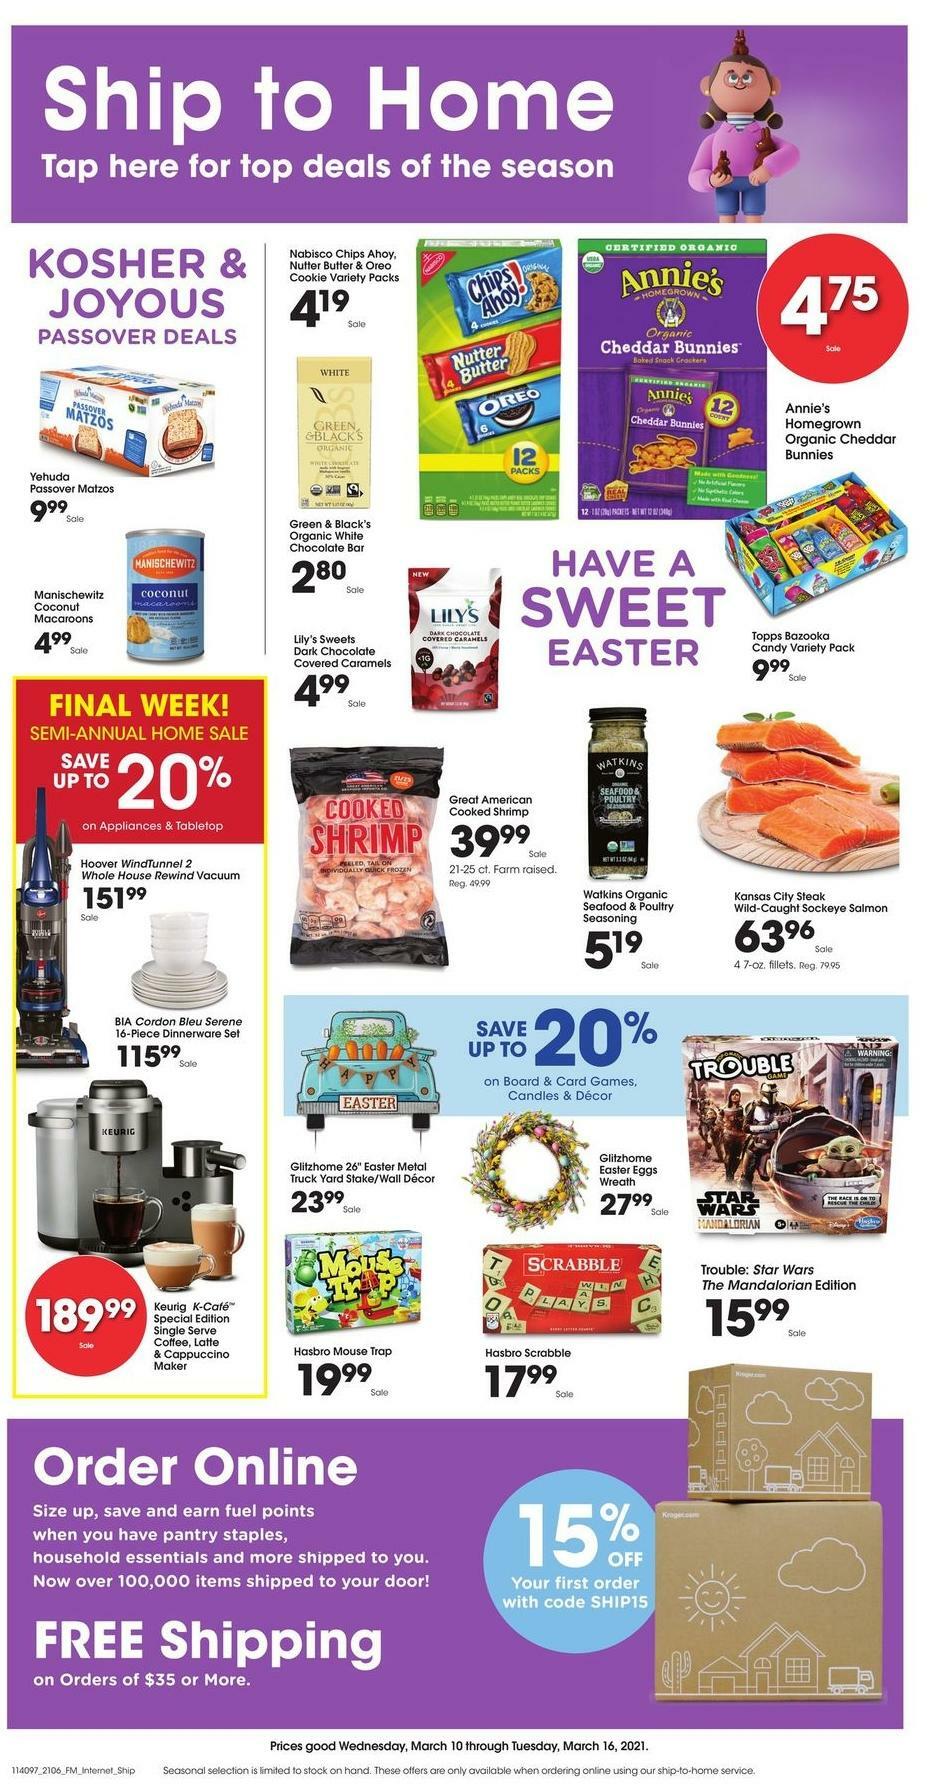 Kroger Ship to Home Weekly Ad from March 10